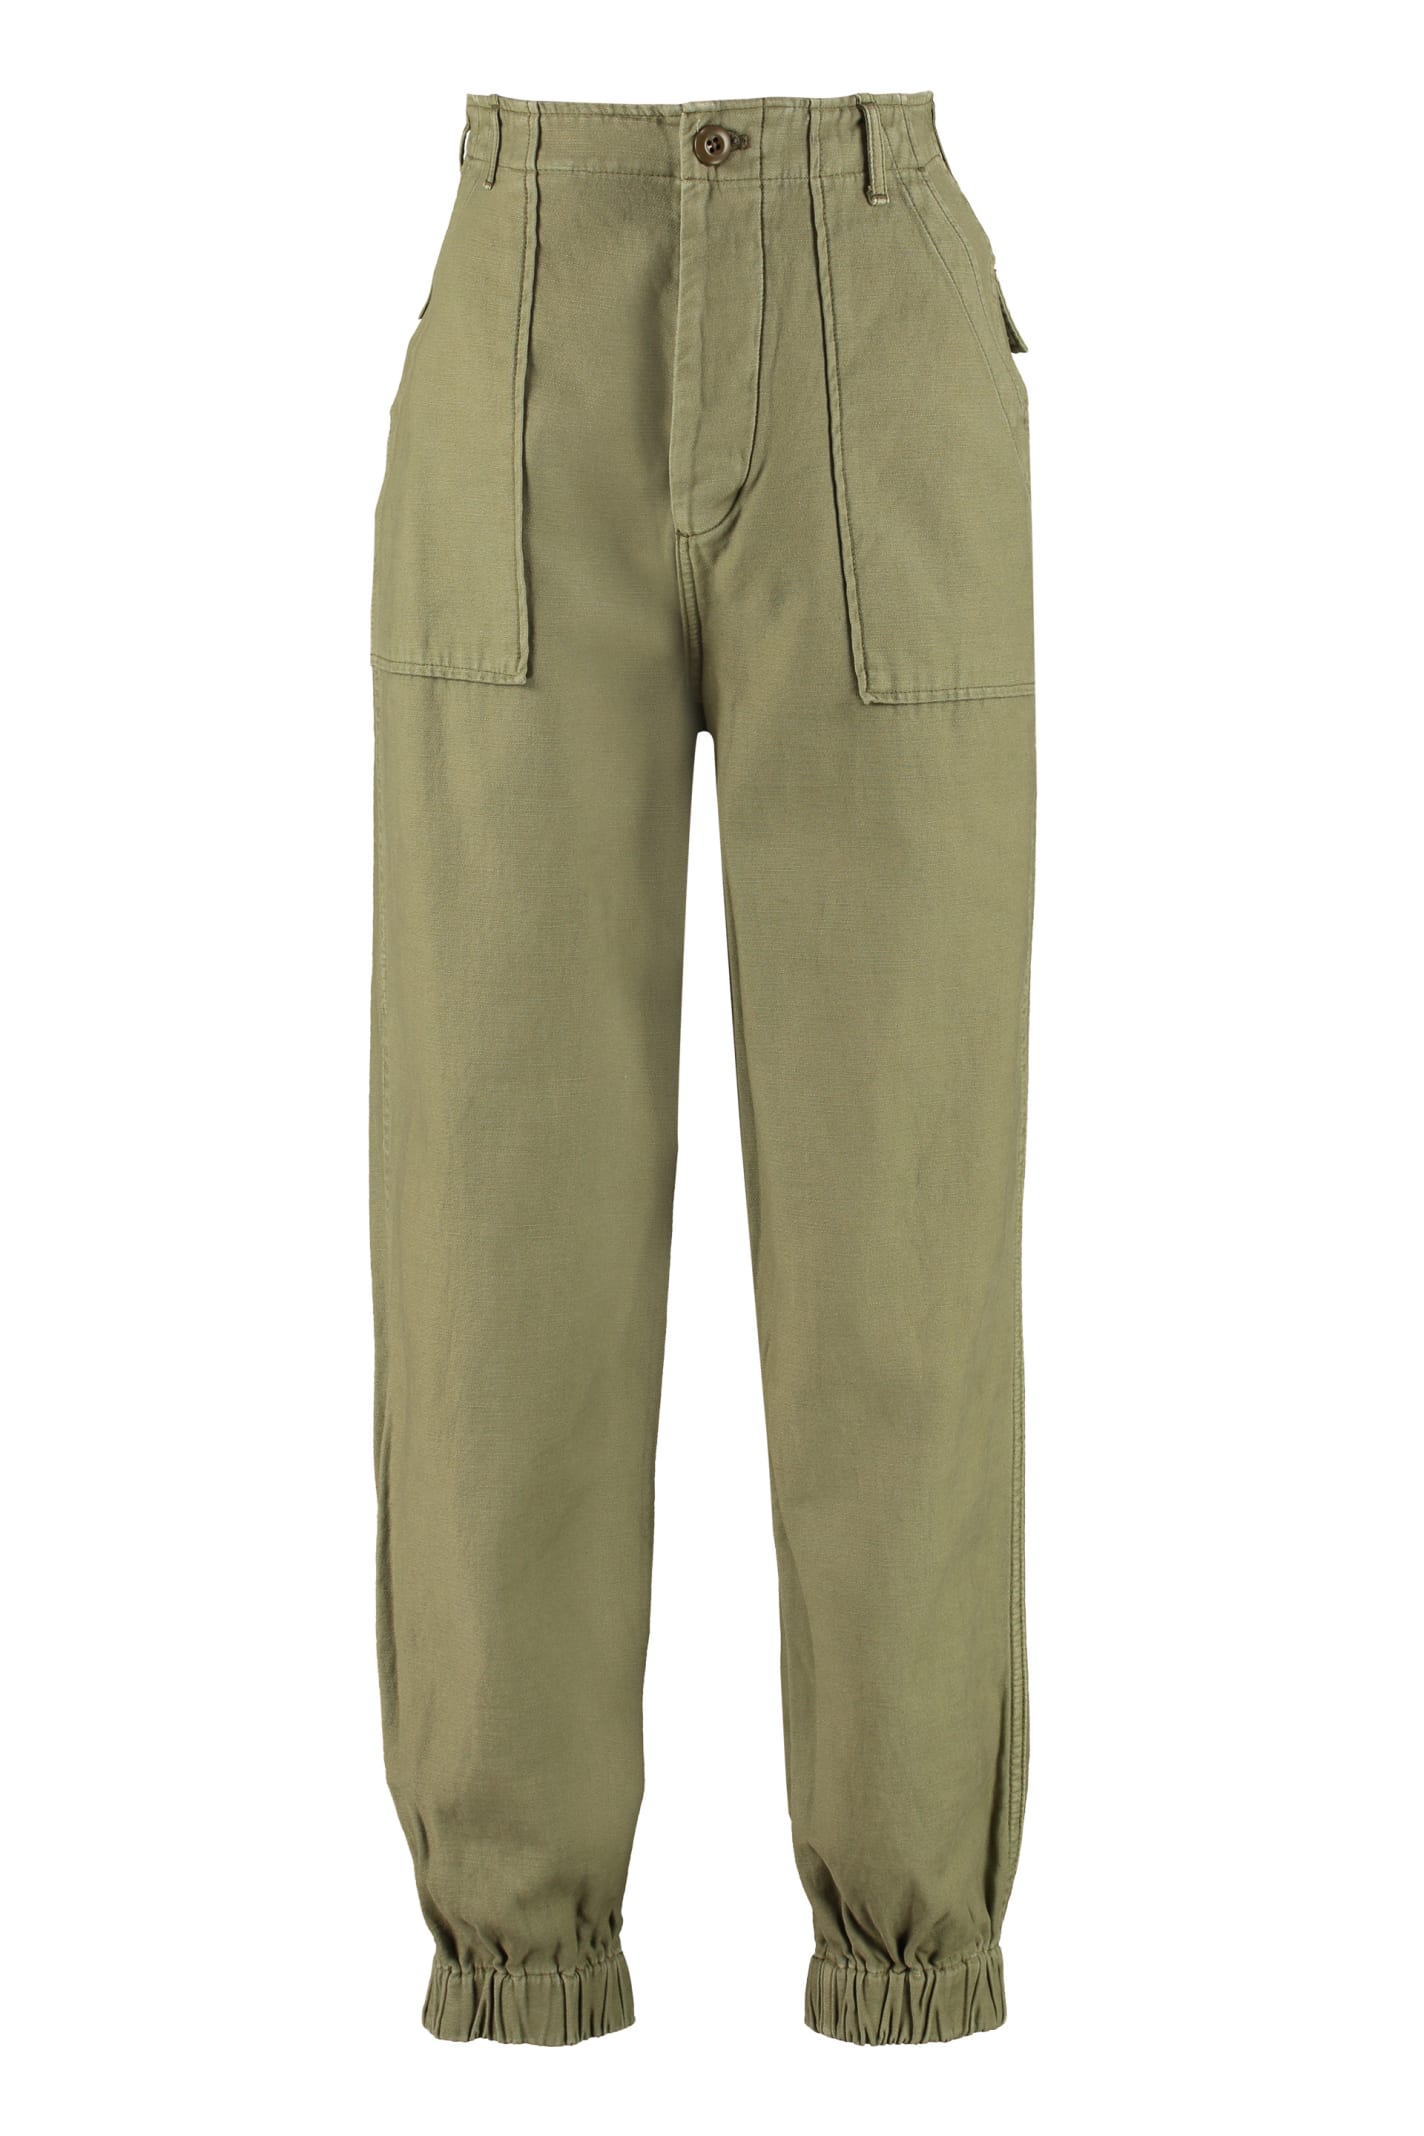 R13 COTTON CARGO-TROUSERS,11233066